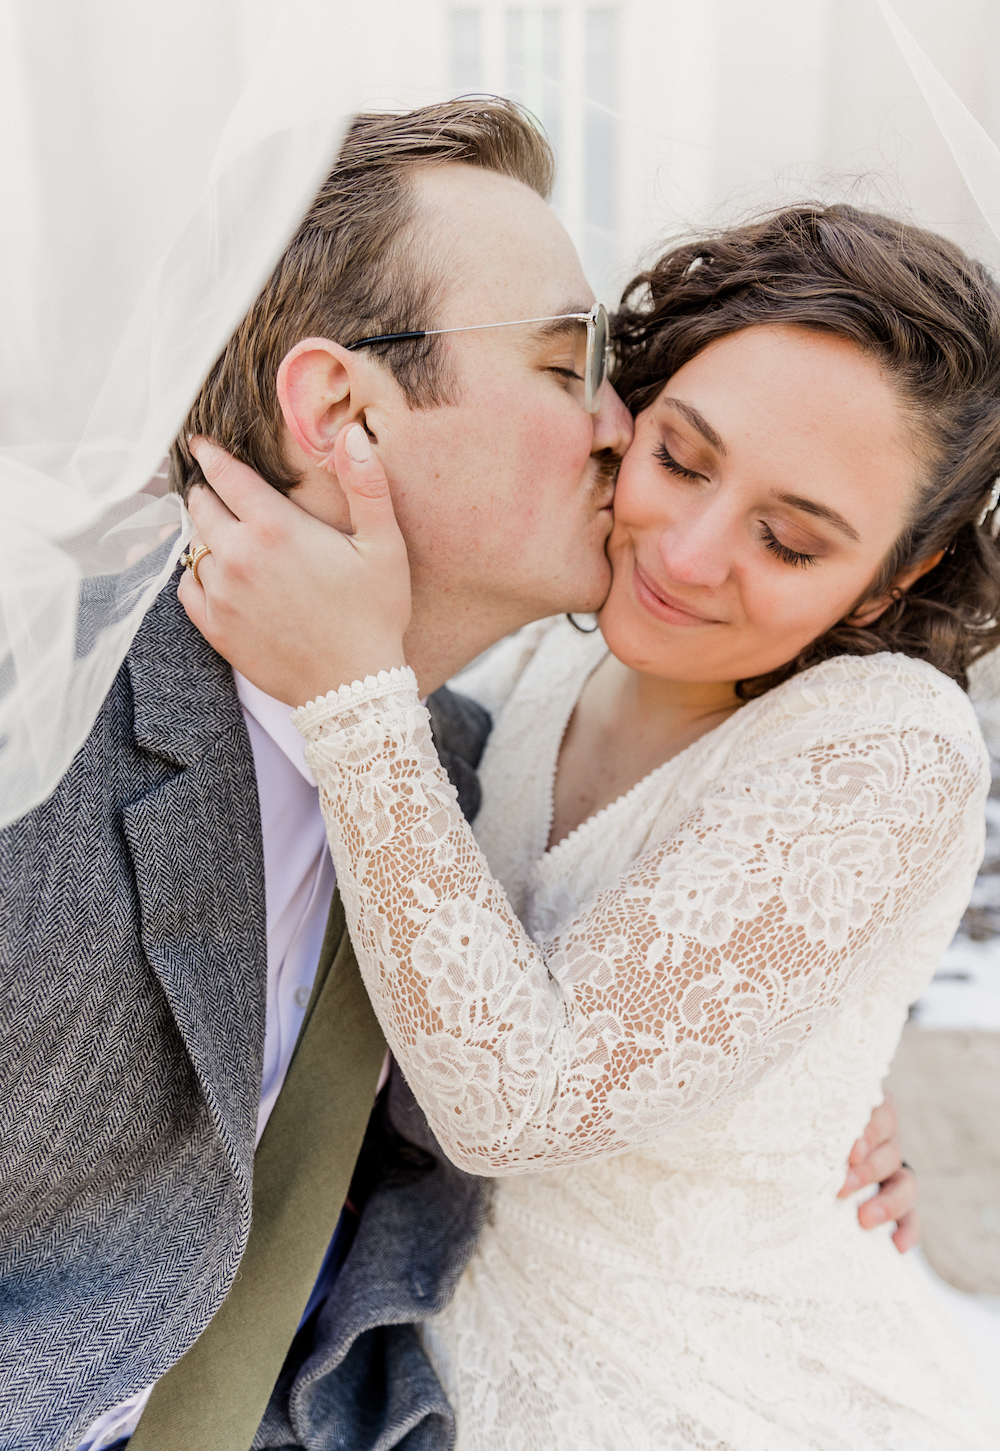 Groom plants a kiss on bride's cheek as she smiles and cups his face with her hands, captured by Robin Kunzler Photo